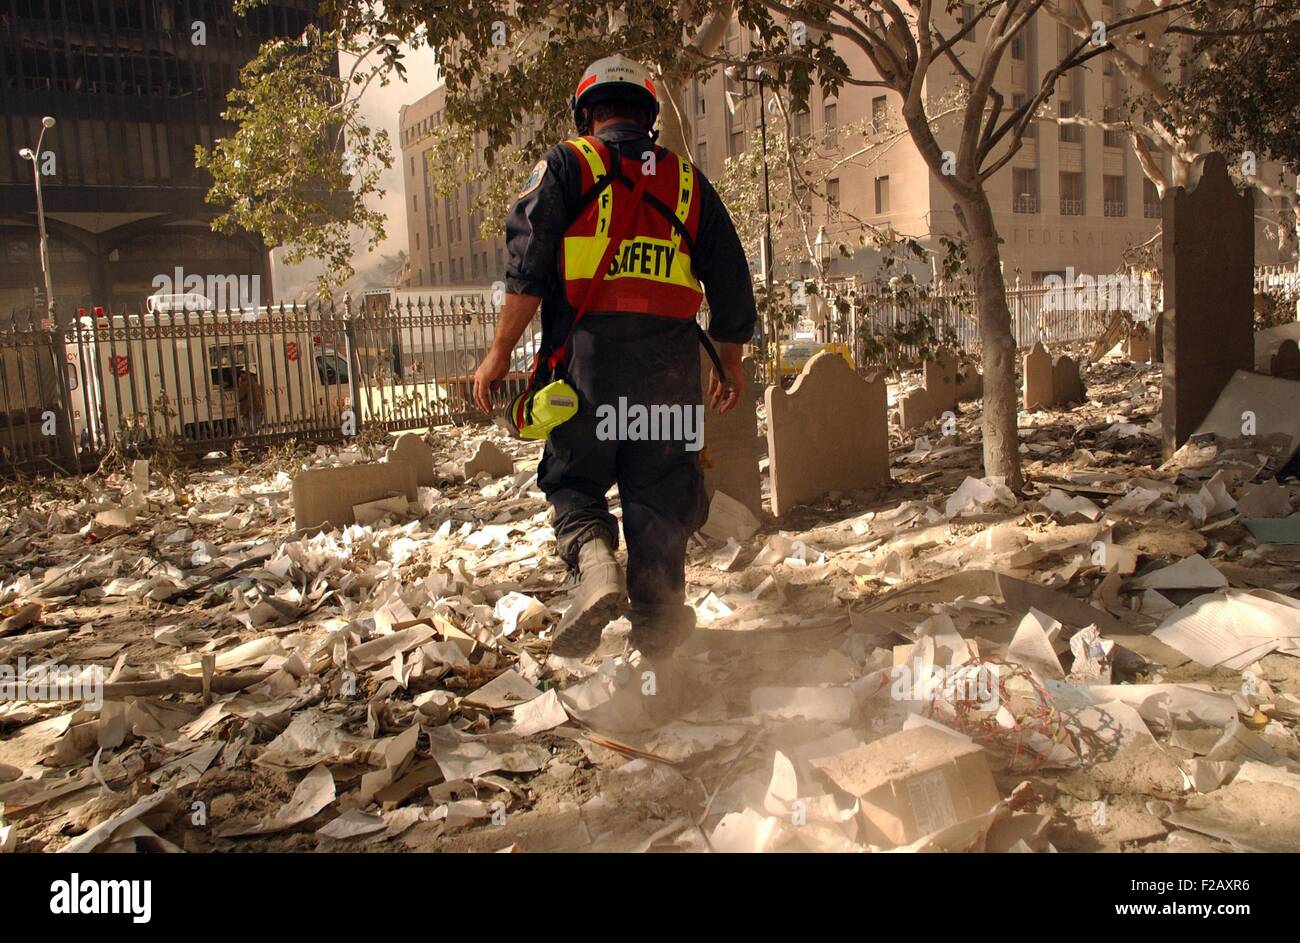 NYC firefighter walks among the old headstones at Trinity Church Cemetery in lower Manhattan. Sept. 19, 2001. The church grounds contain the graves of notable 18th and 19th century New Yorkers, including Alexander Hamilton and John Jacob Astor. New York City, after September 11, 2001 terrorist attacks. (BSLOC 2015 2 100) Stock Photo